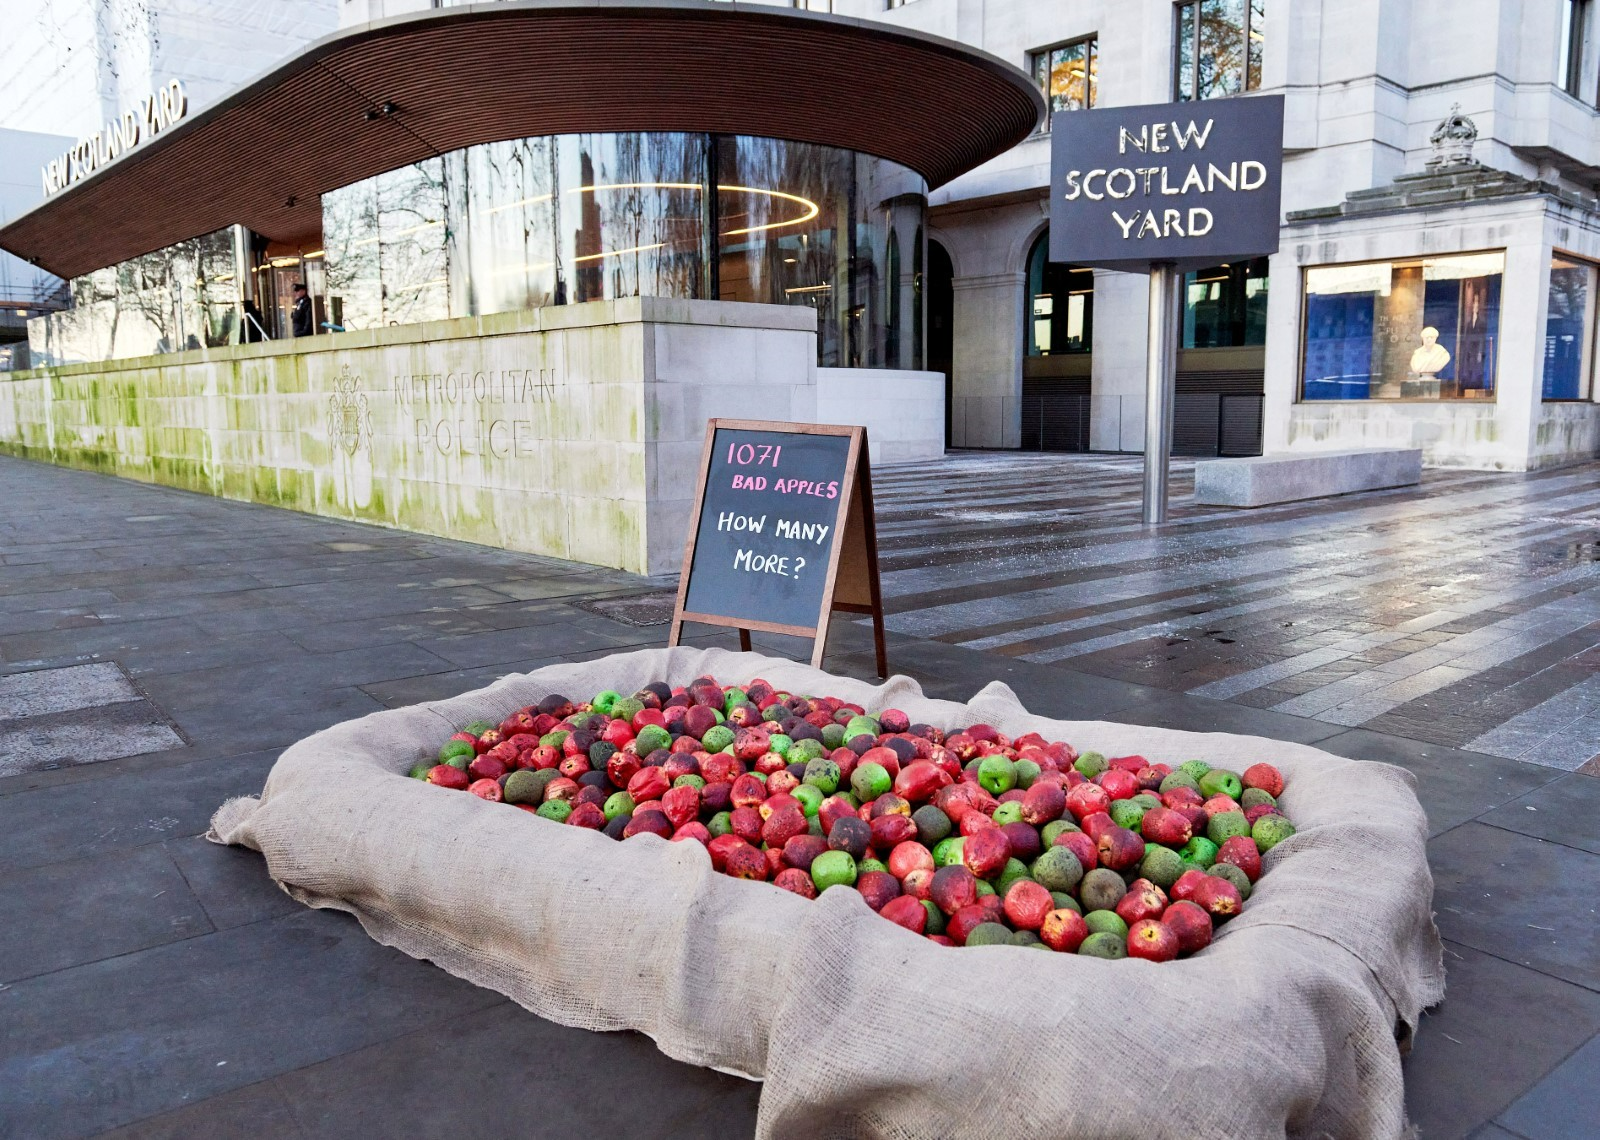 Collection of apples outside New Scotland Yard.